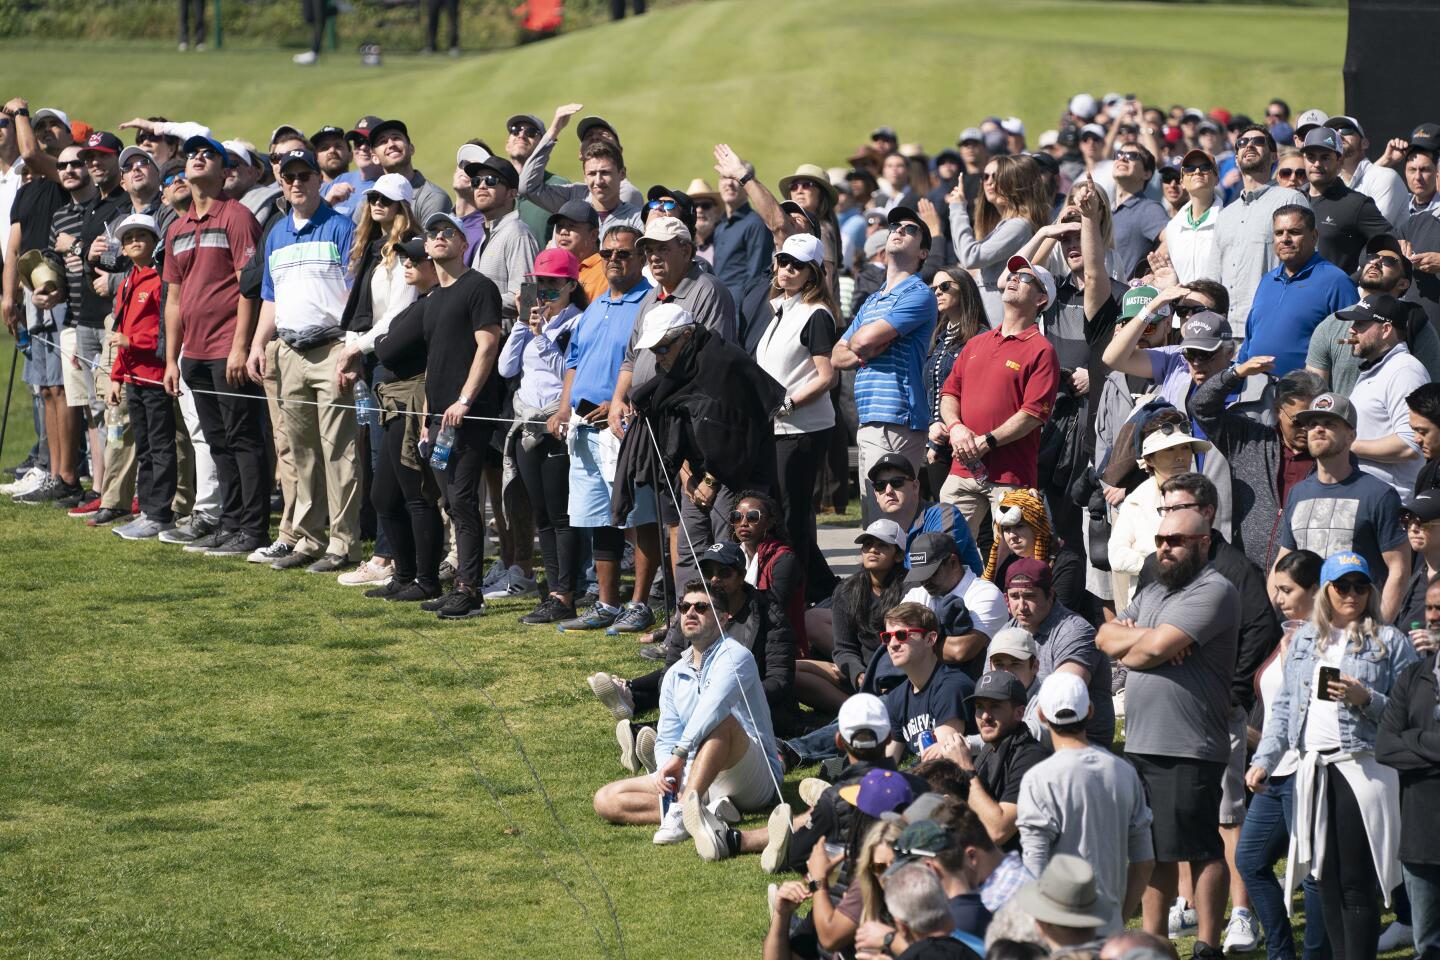 The gallery watches a drive by Tiger Woods on the sixth hole during the third round of the Genesis Invitational at Riviera Country Club on Feb. 15, 2020.